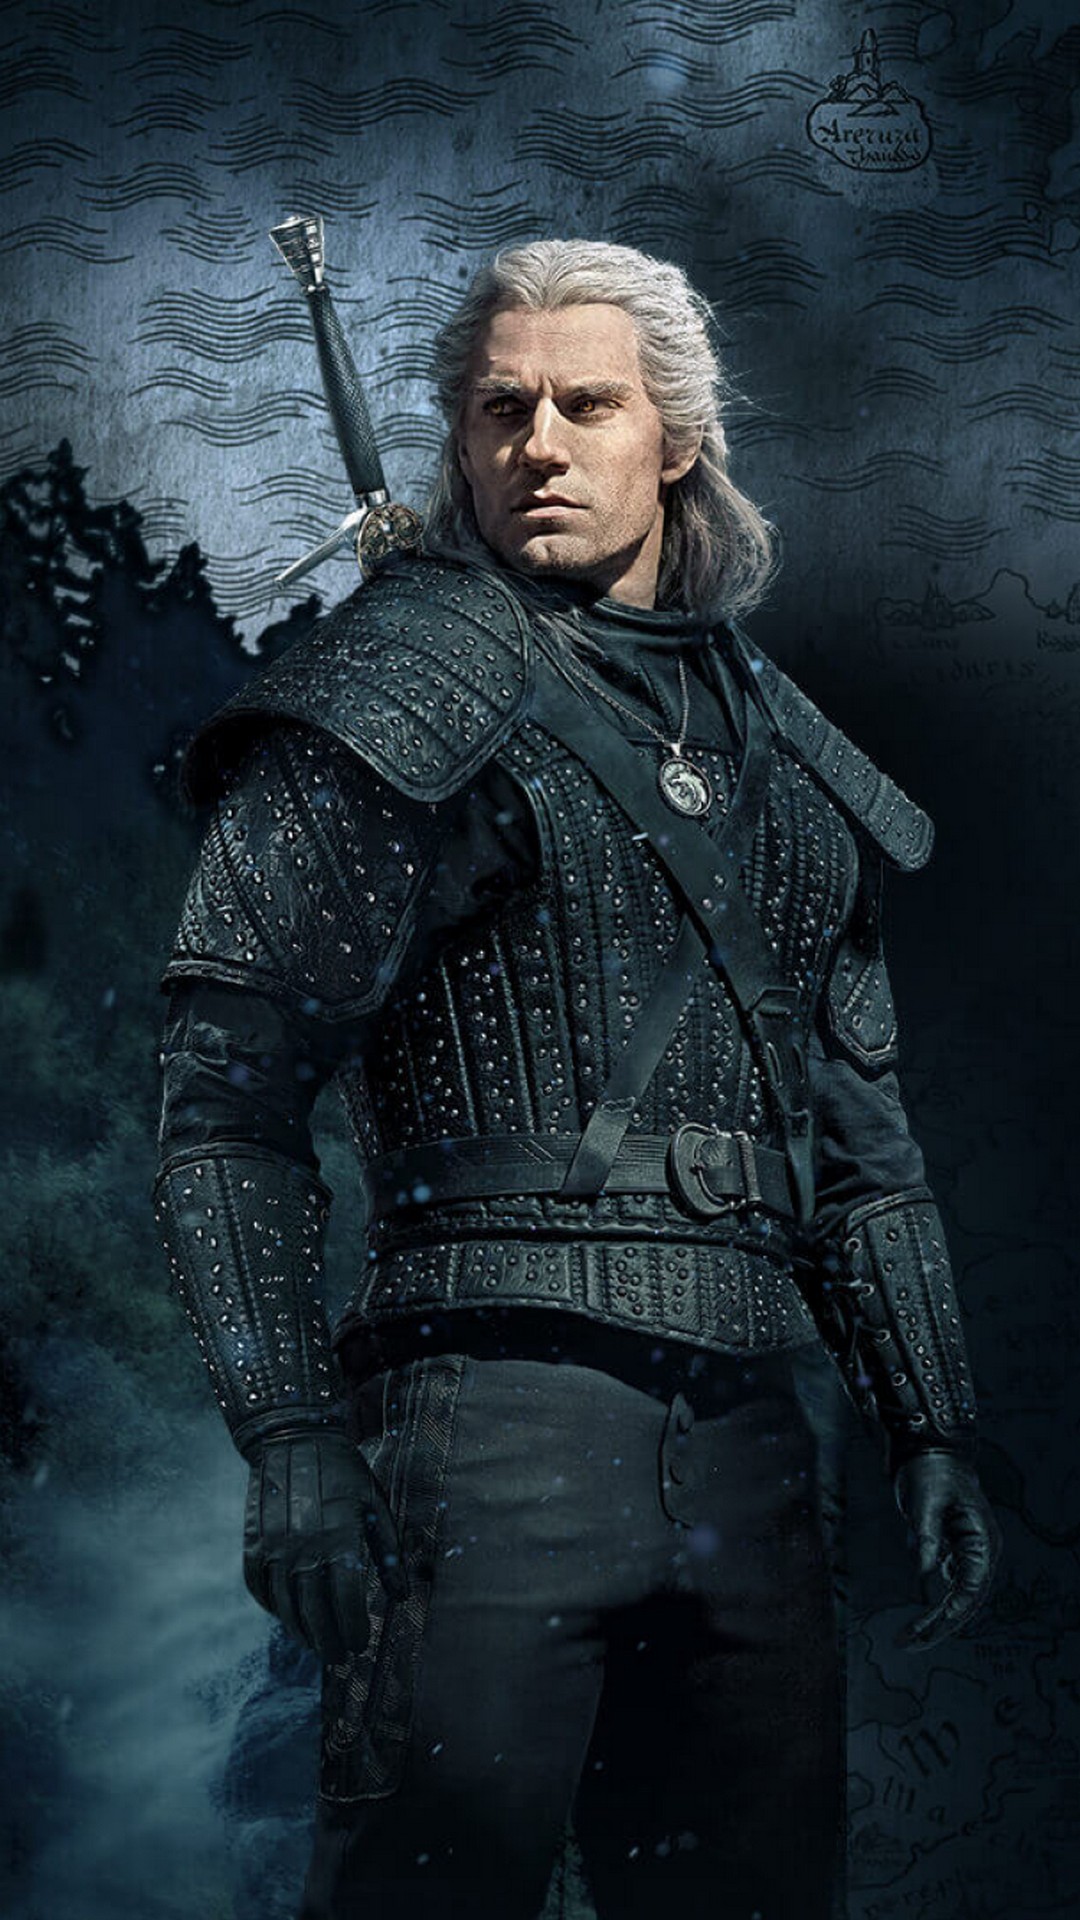 The Witcher Android Wallpaper With high-resolution 1080X1920 pixel. You can use this wallpaper for your Android backgrounds, Tablet, Samsung Screensavers, Mobile Phone Lock Screen and another Smartphones device